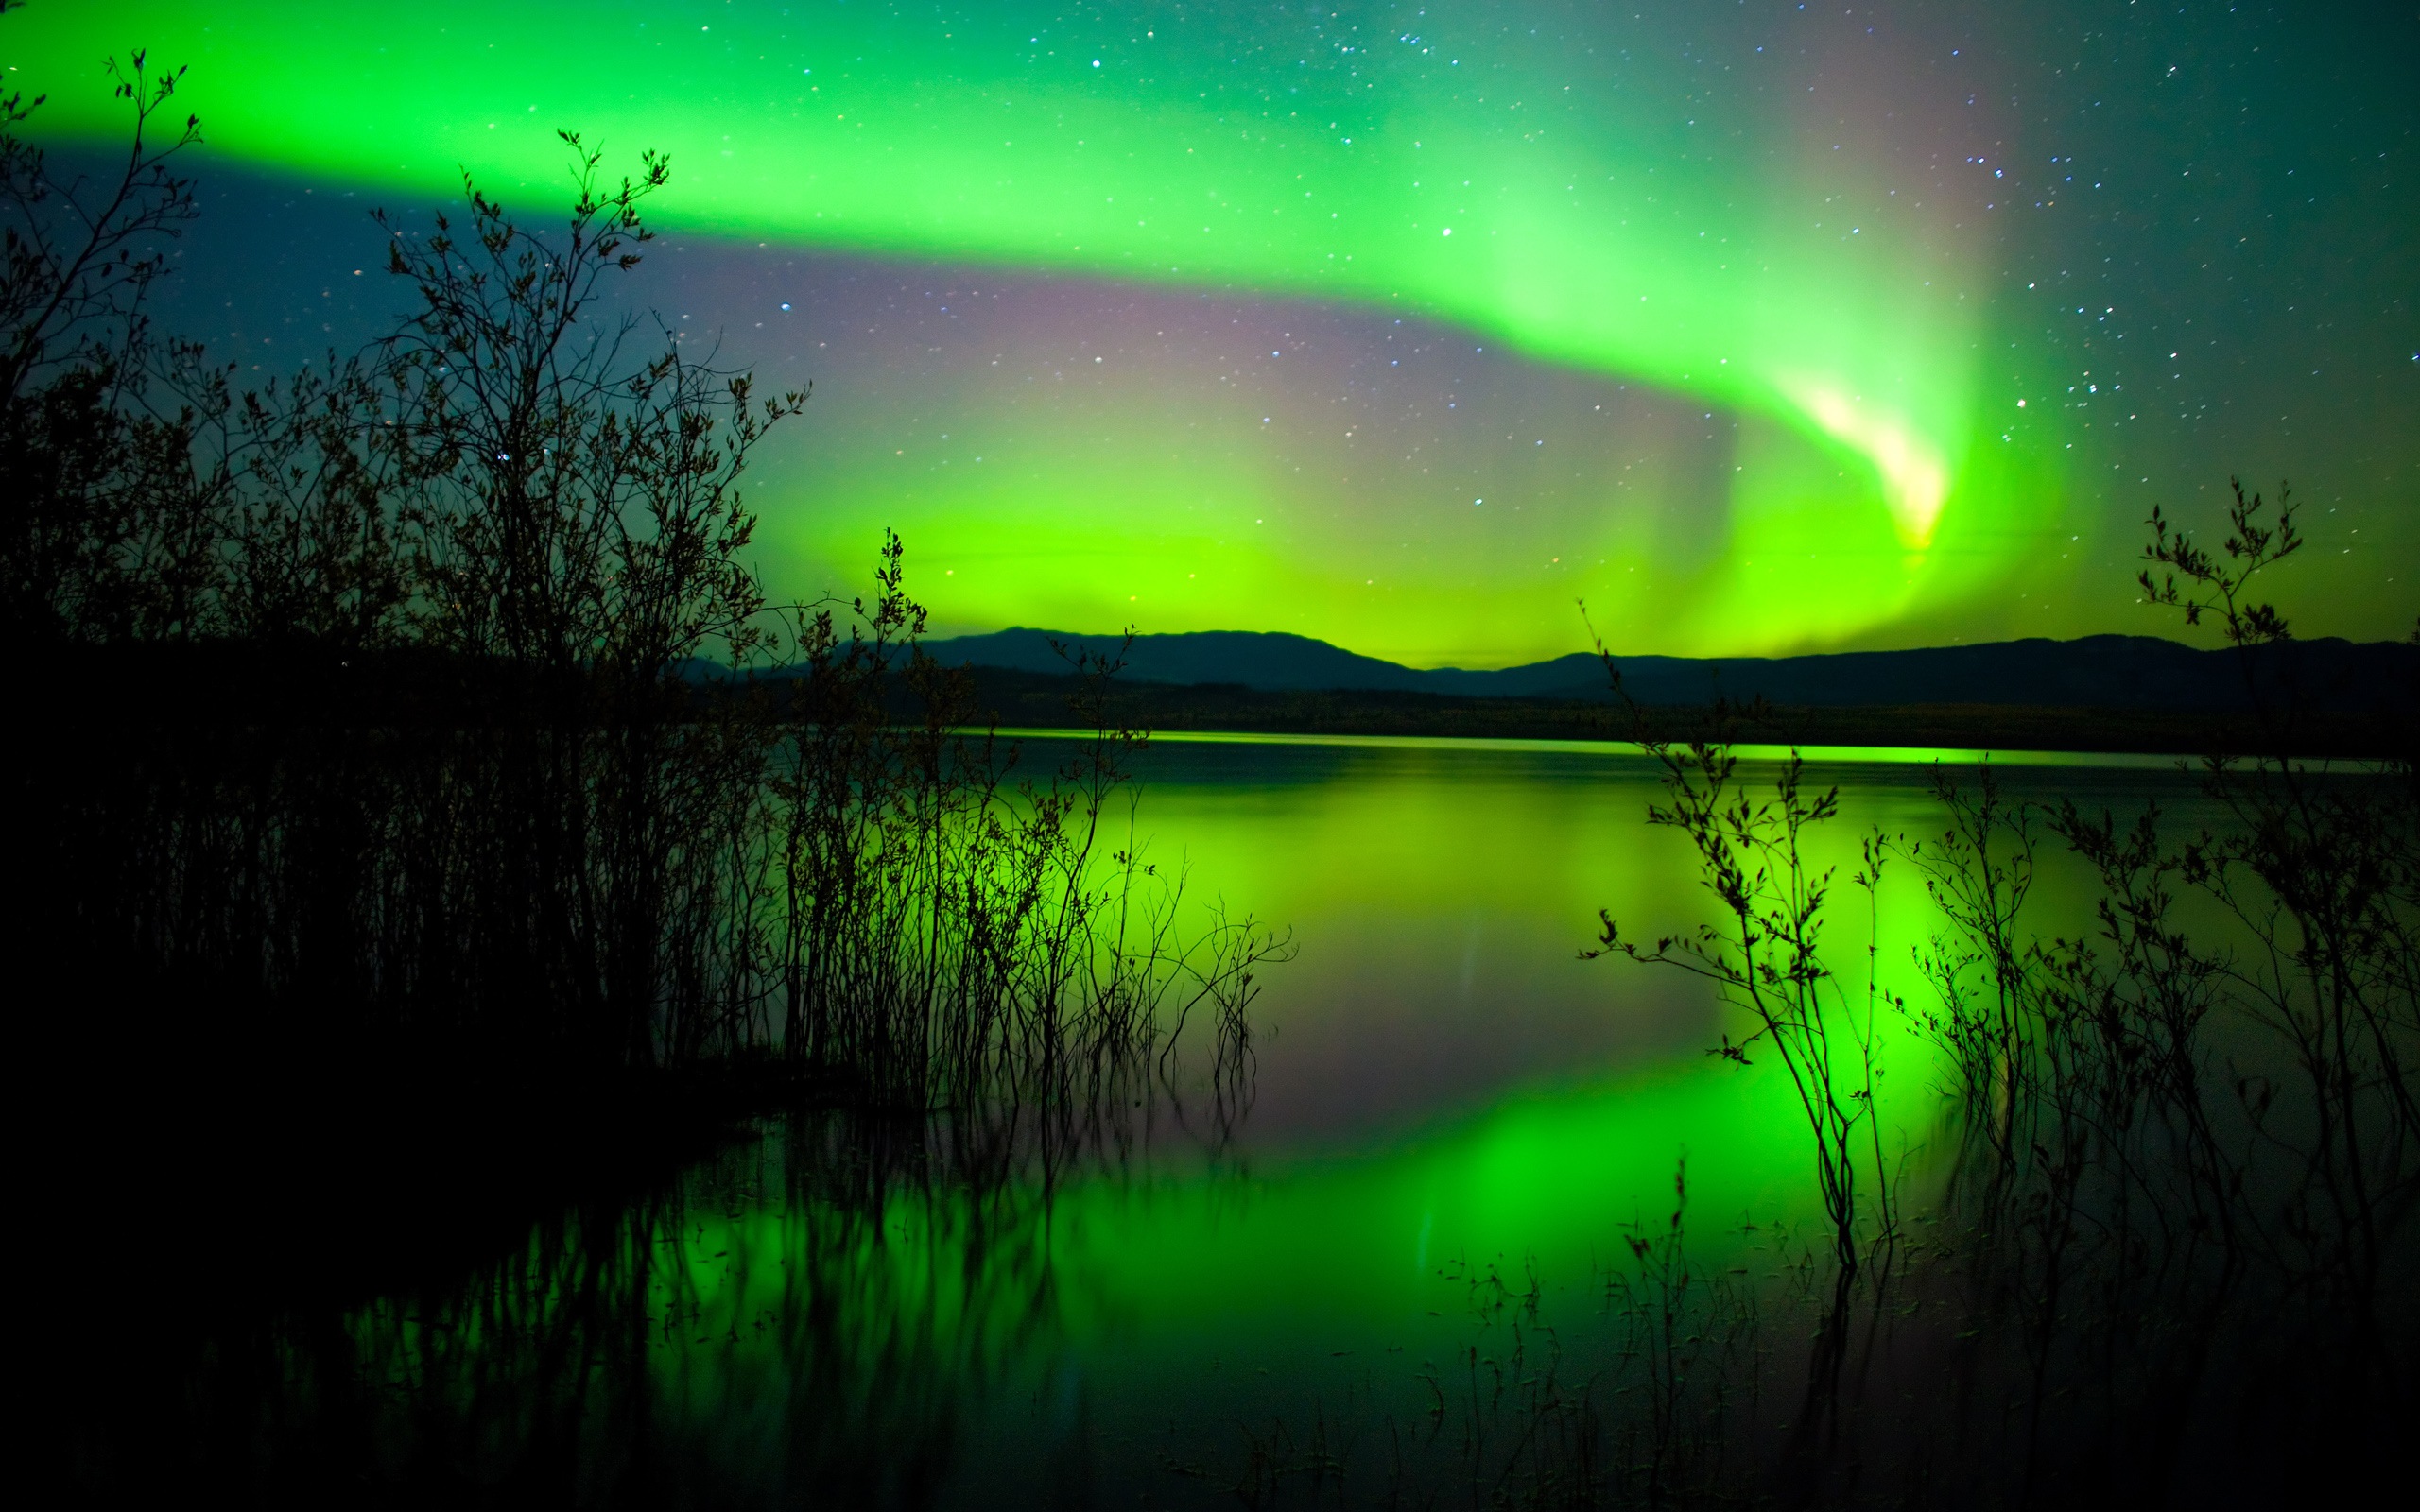 Natural wonders of the Northern Lights HD Wallpaper (2) #12 - 2560x1600